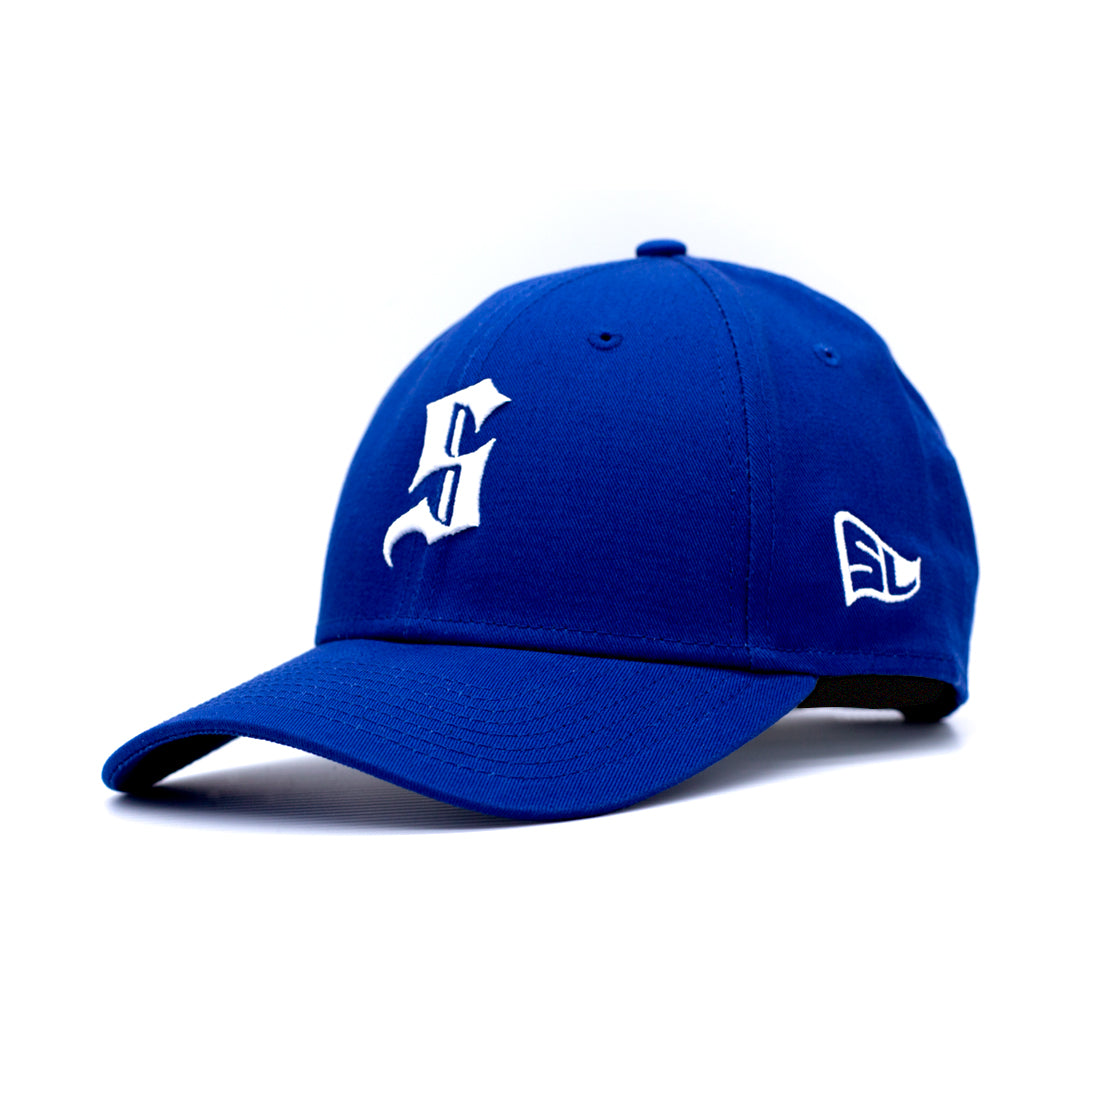 S Life Structured Cap in royal